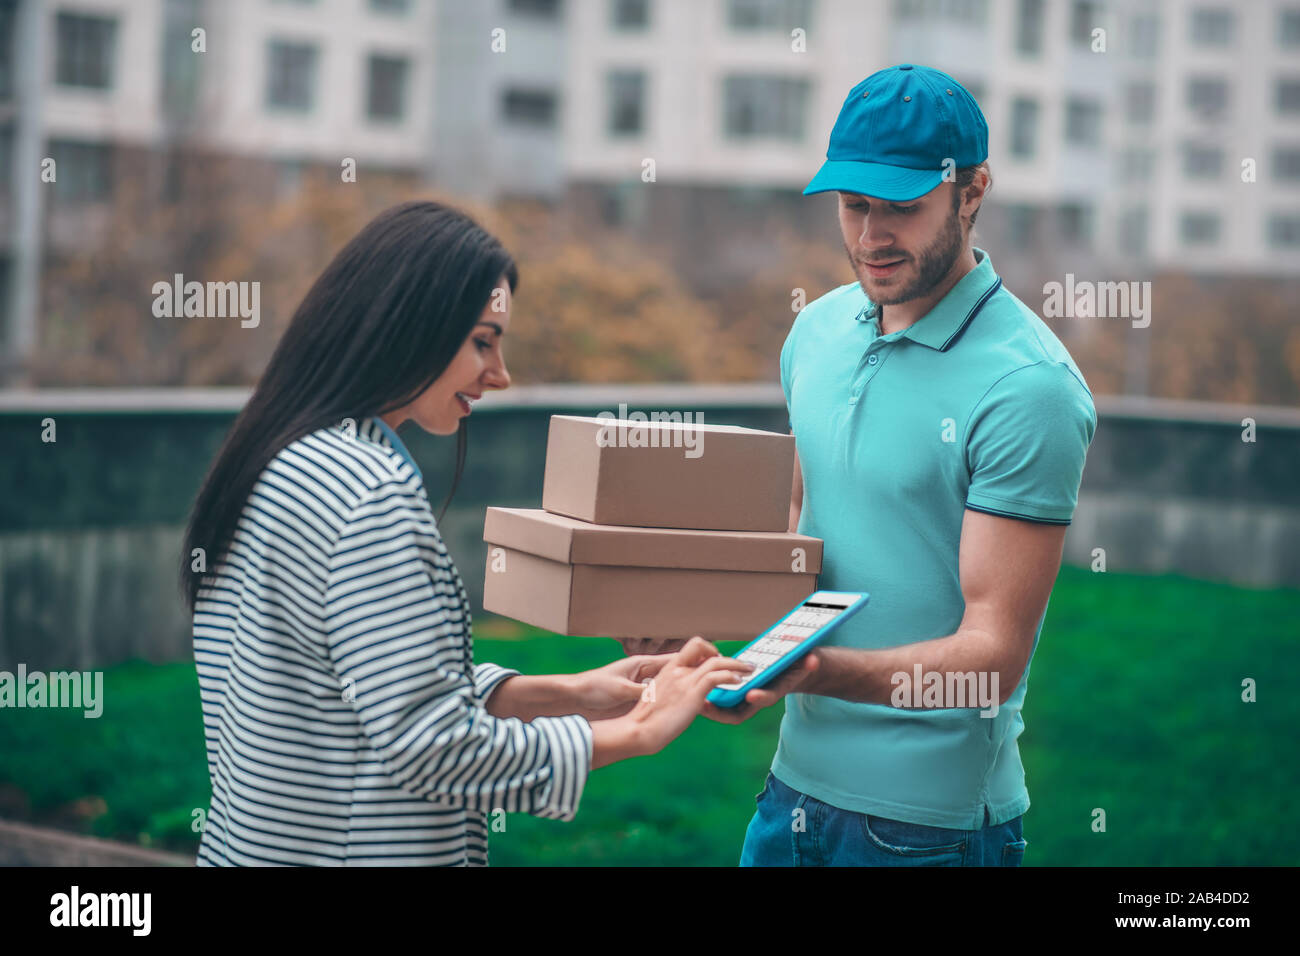 Dark-haired woman standing near delivery man holding boxes Stock Photo